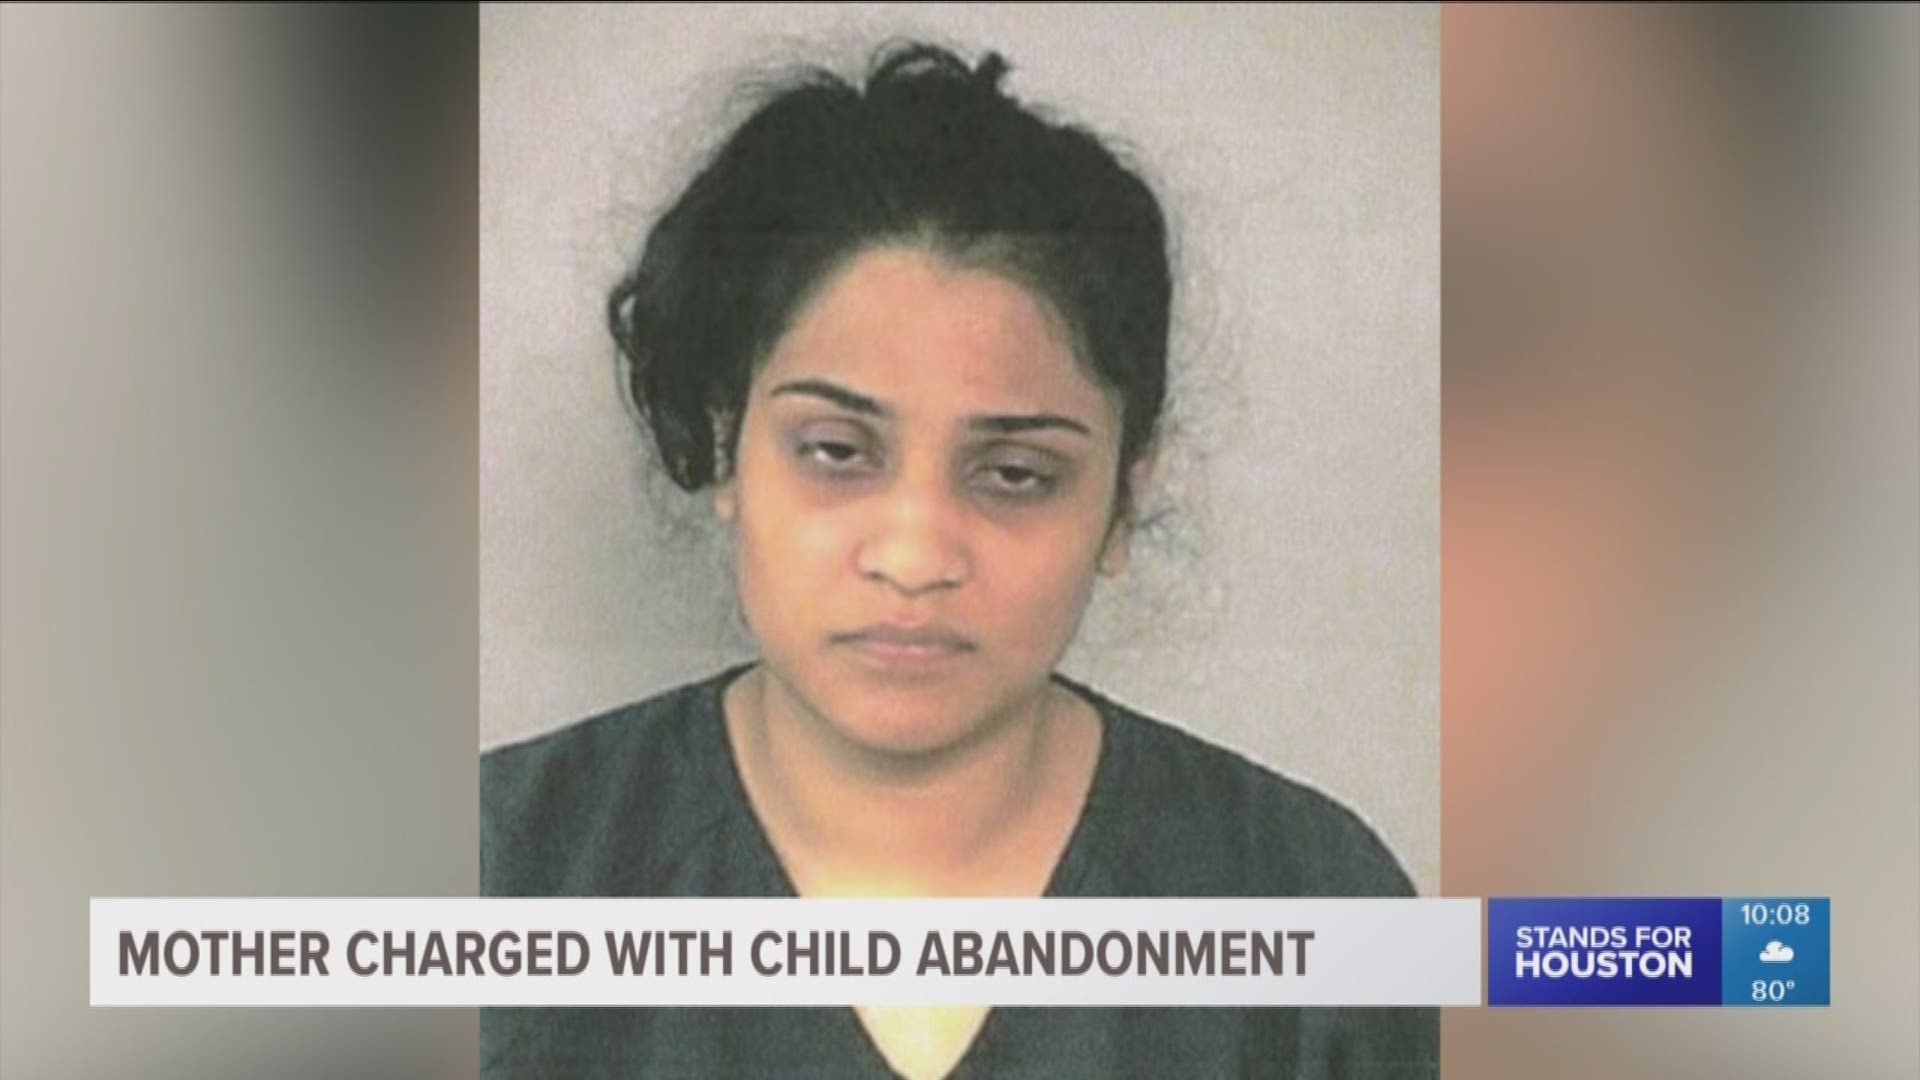 A Katy mom was arrested Wednesday after allegedly leaving her 8-month-old daughter in a hot car.